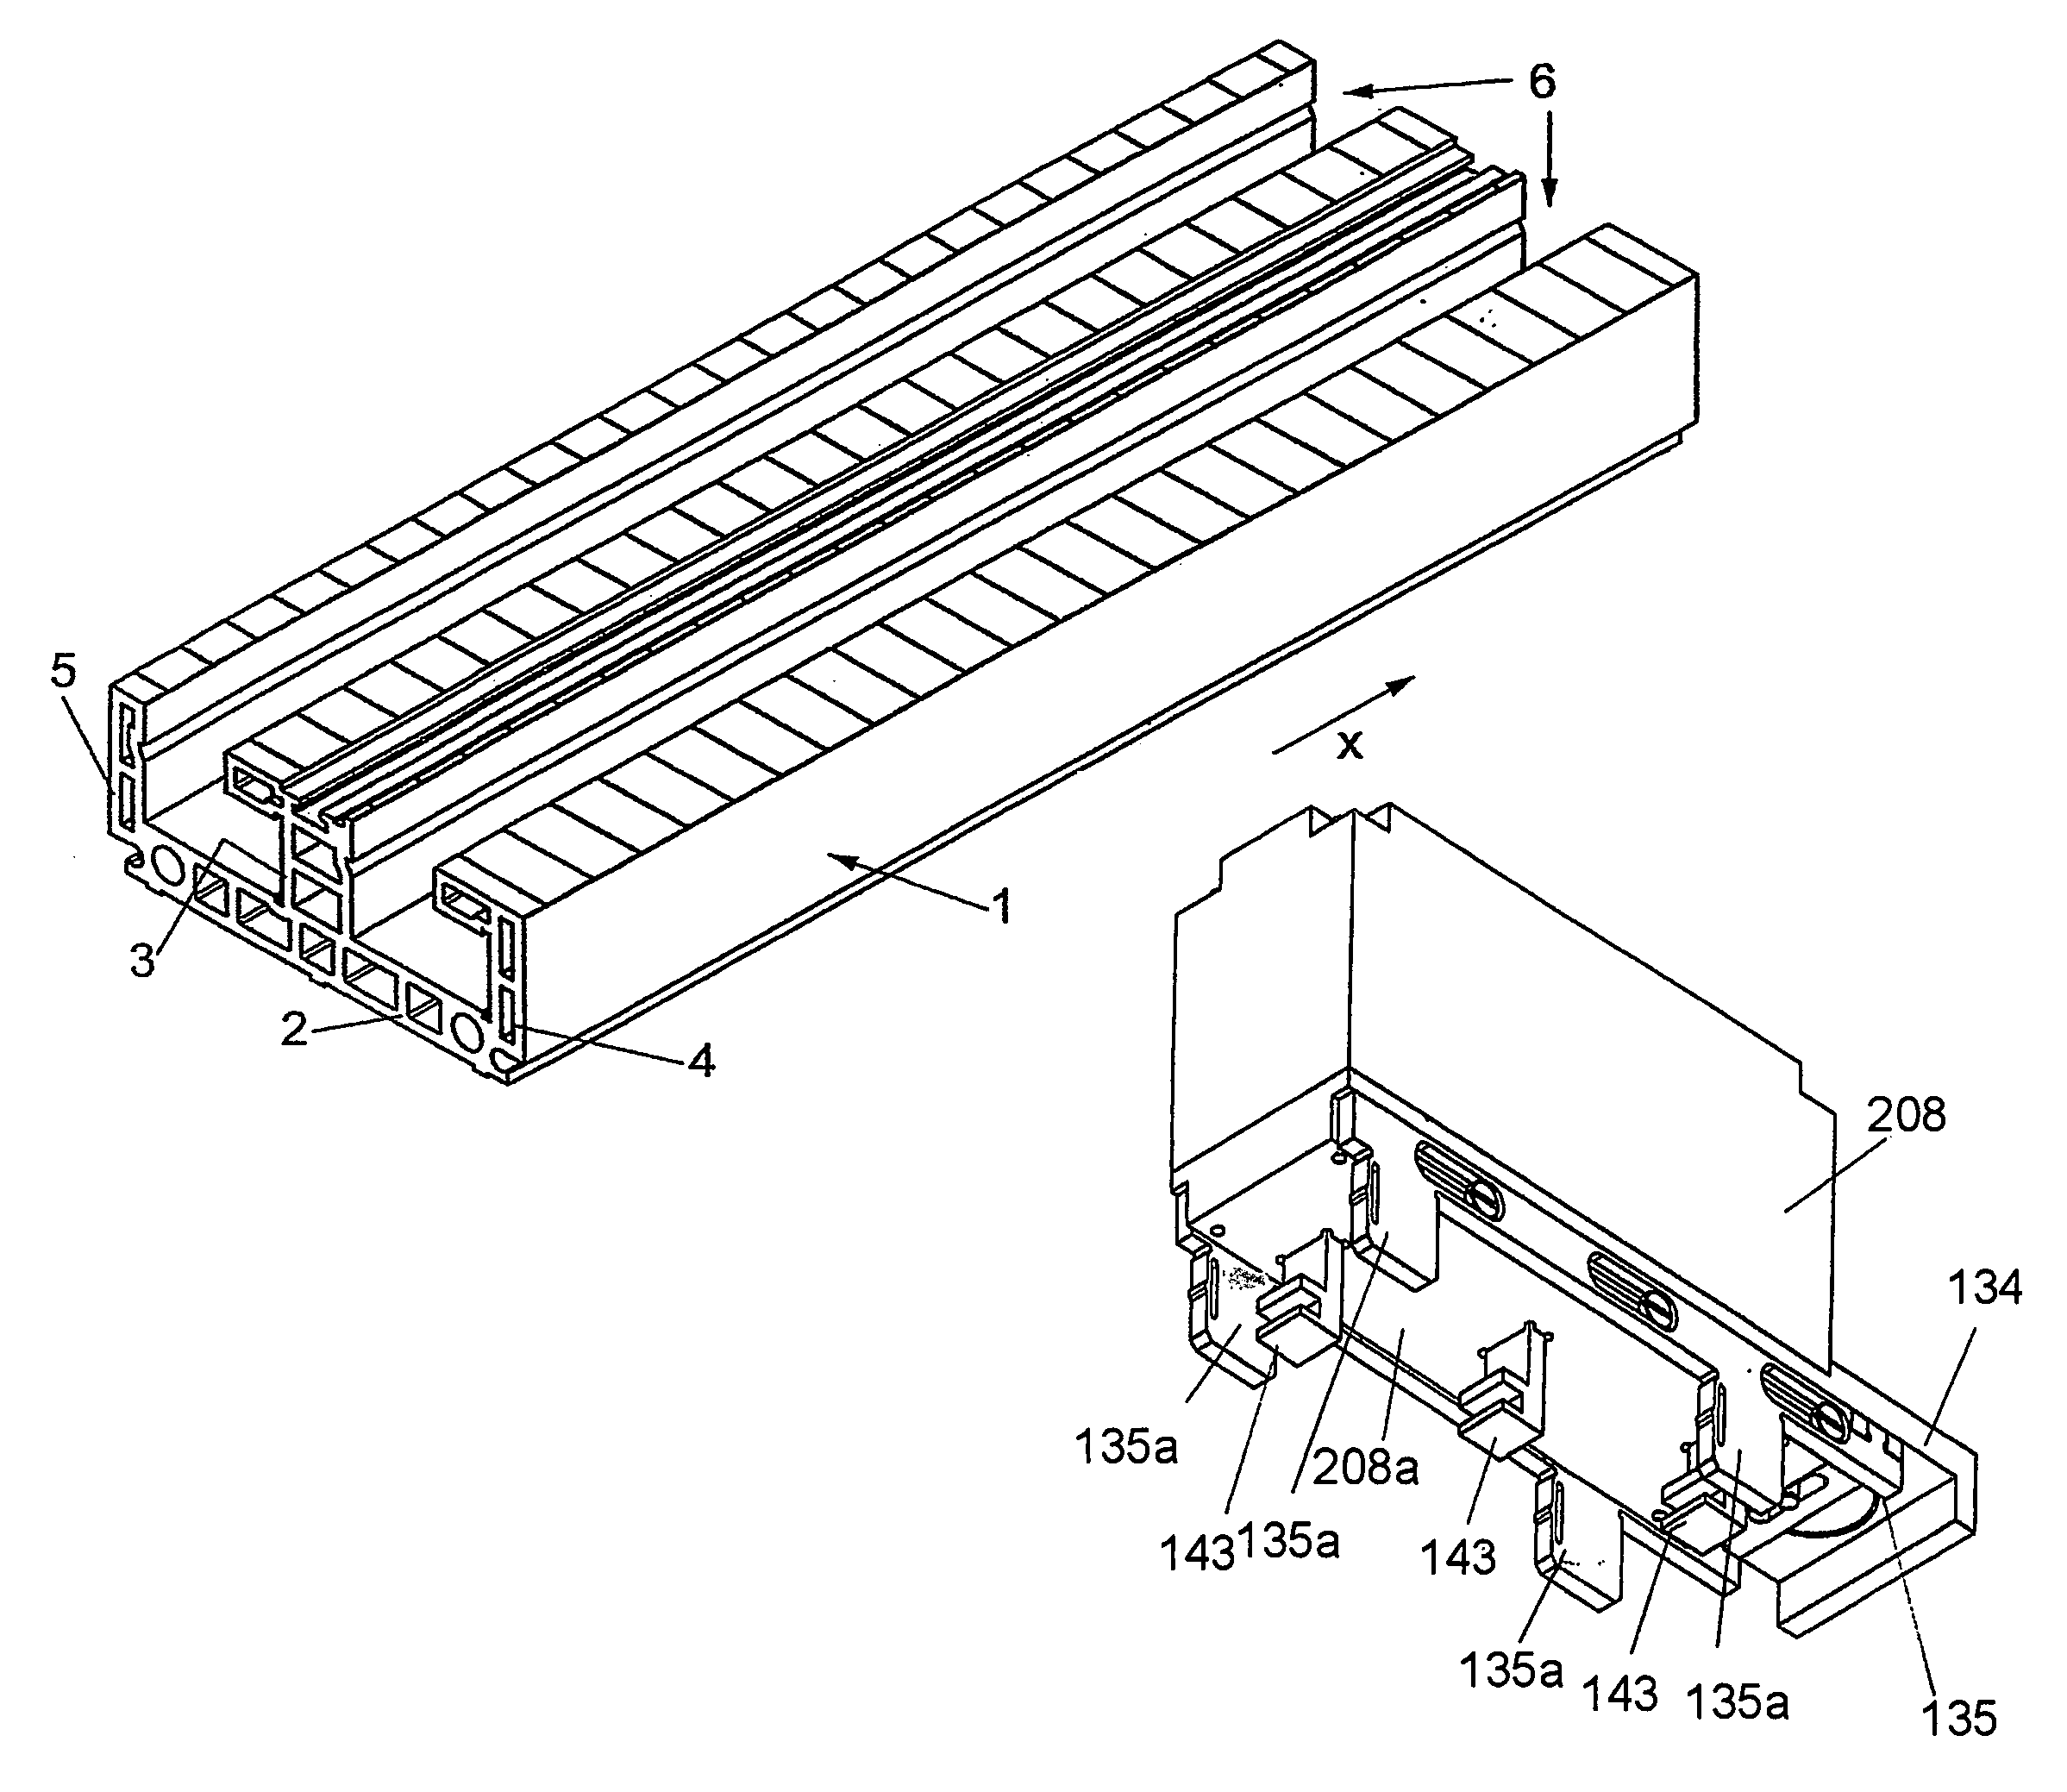 Apparatus for mounting electrical and mechanical components on a support body